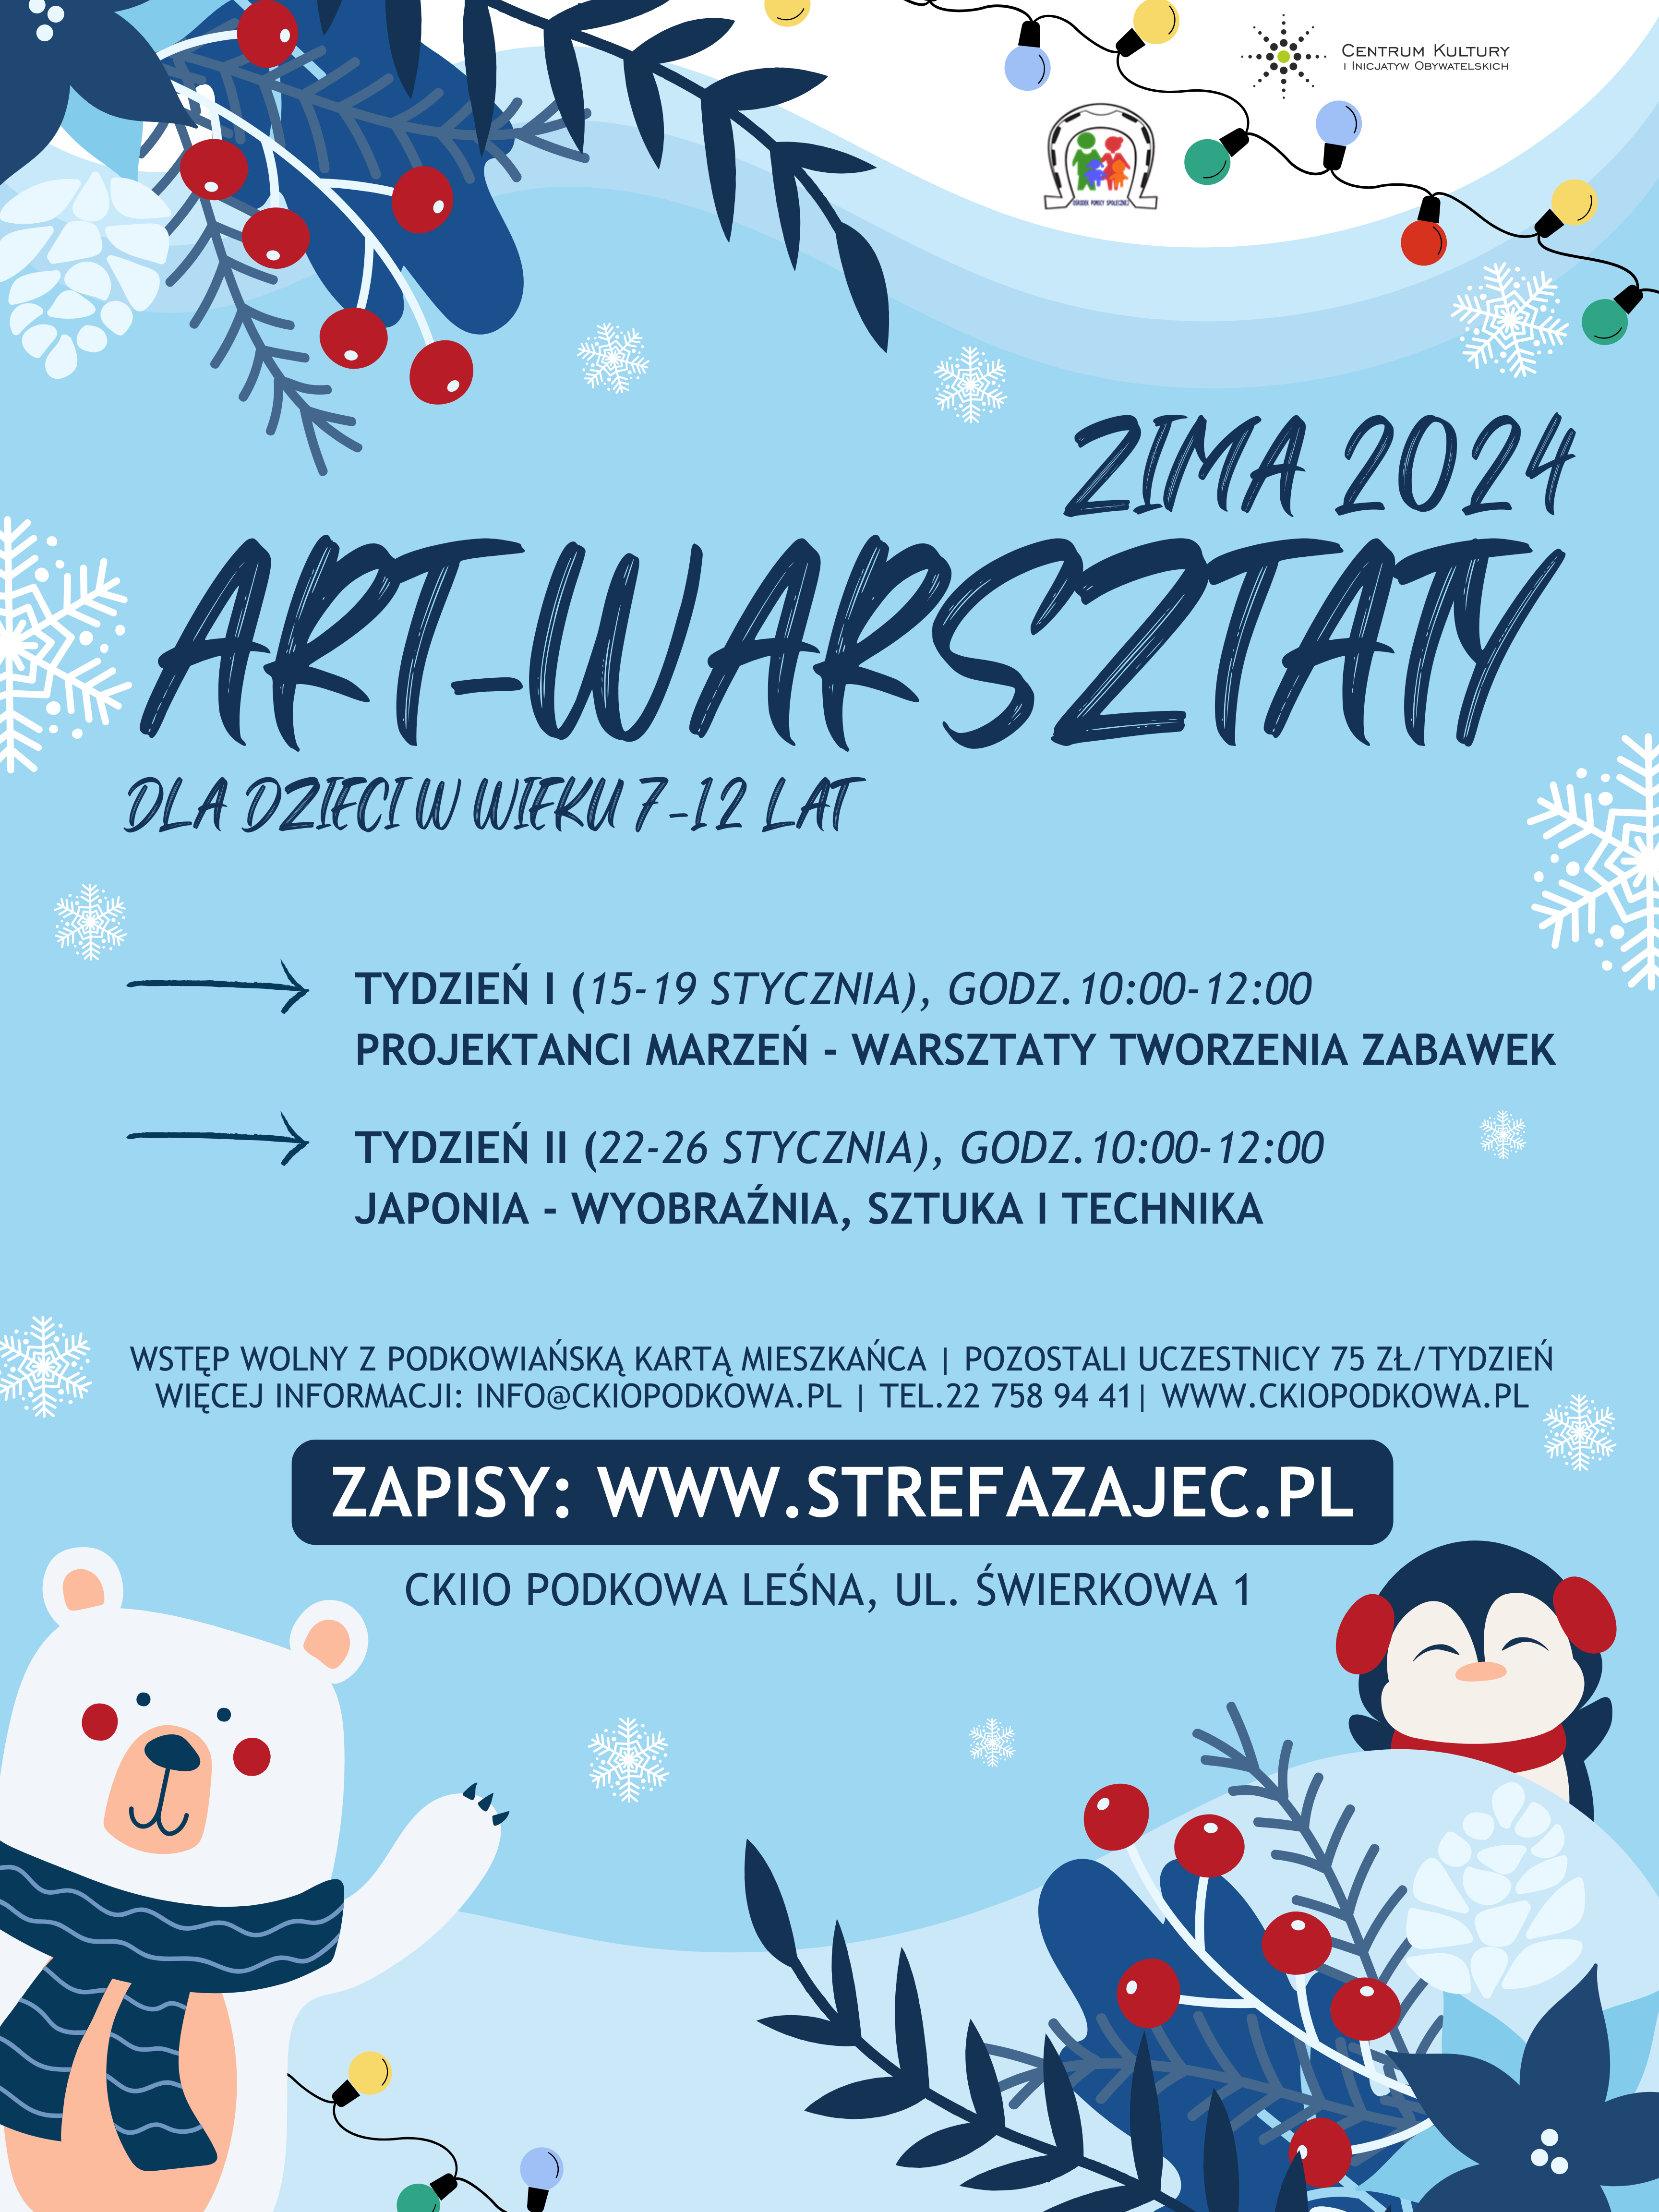 You are currently viewing ART-WARSZTATY – ZIMA 2024